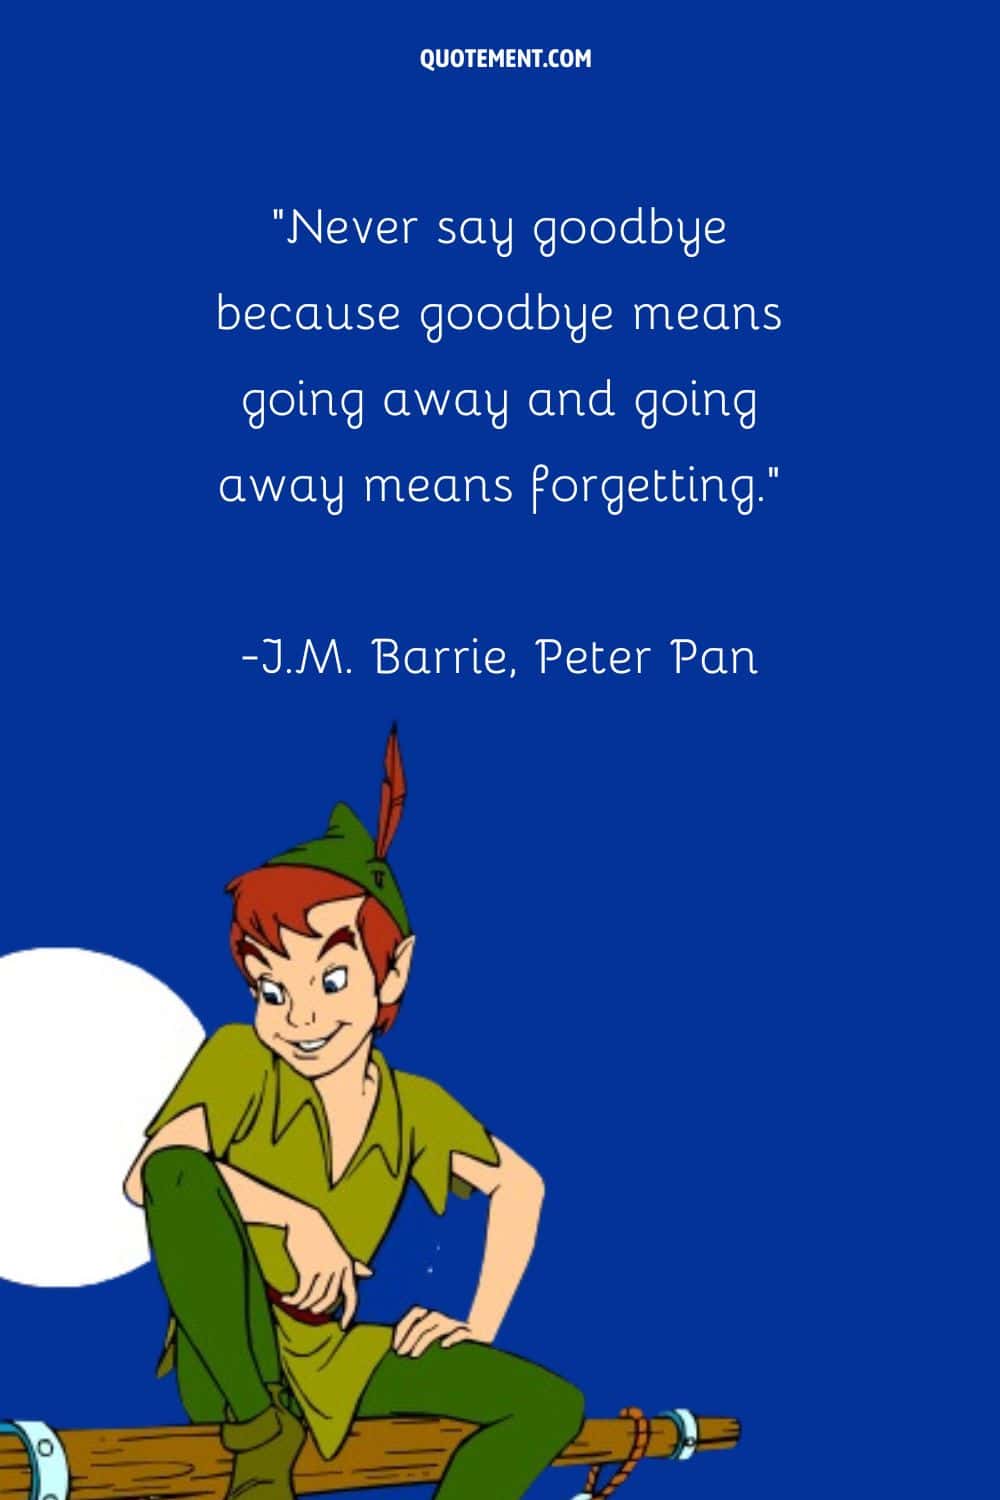 “Never say goodbye because goodbye means going away and going away means forgetting.” ― J.M. Barrie, Peter Pan